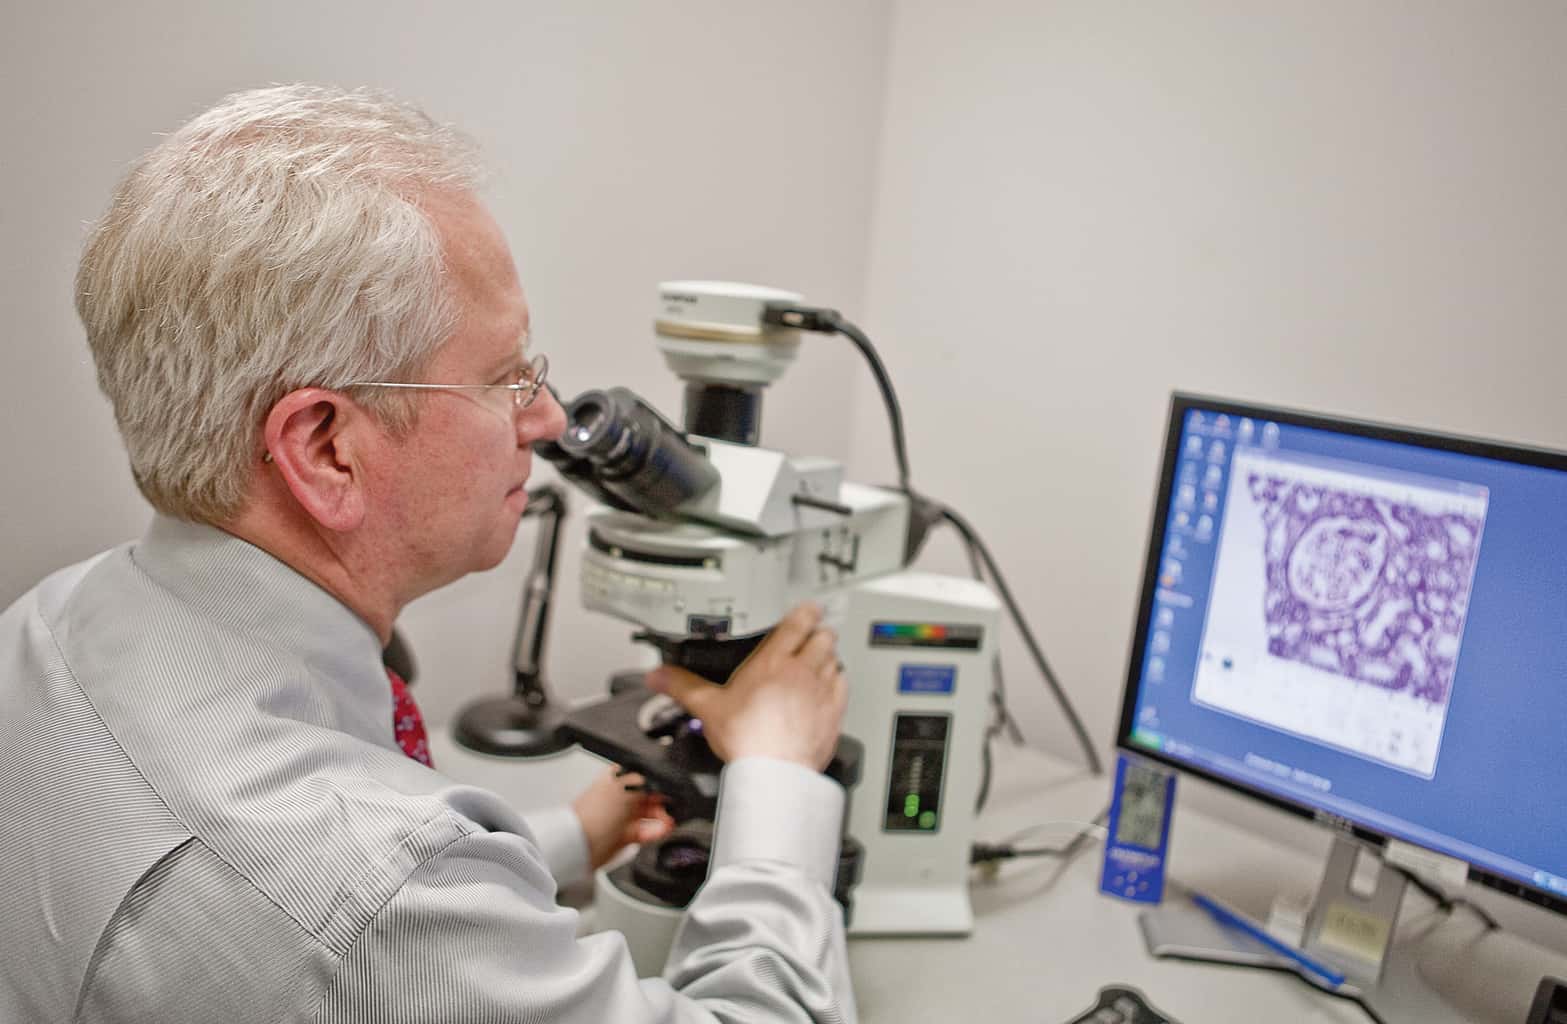 dr. linzie with microscope and computer